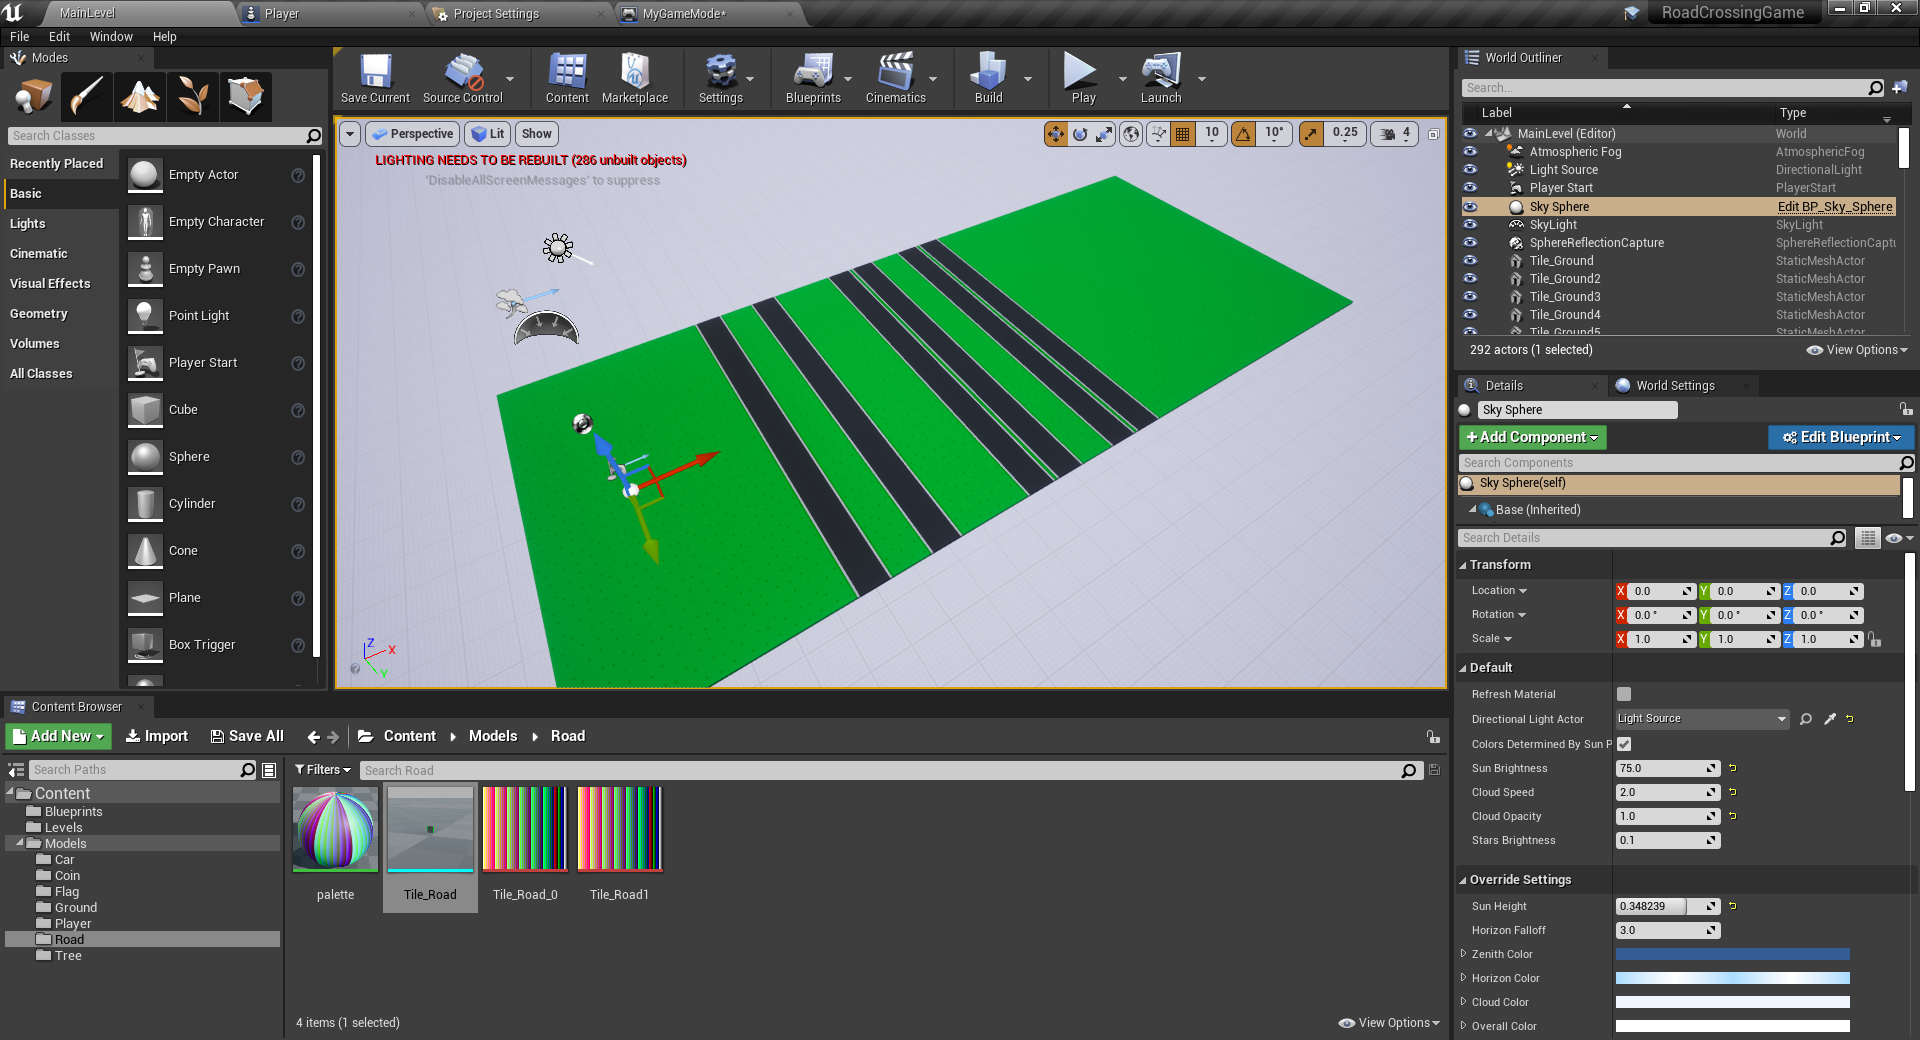 Tile combination in Unreal Engine to create road layout